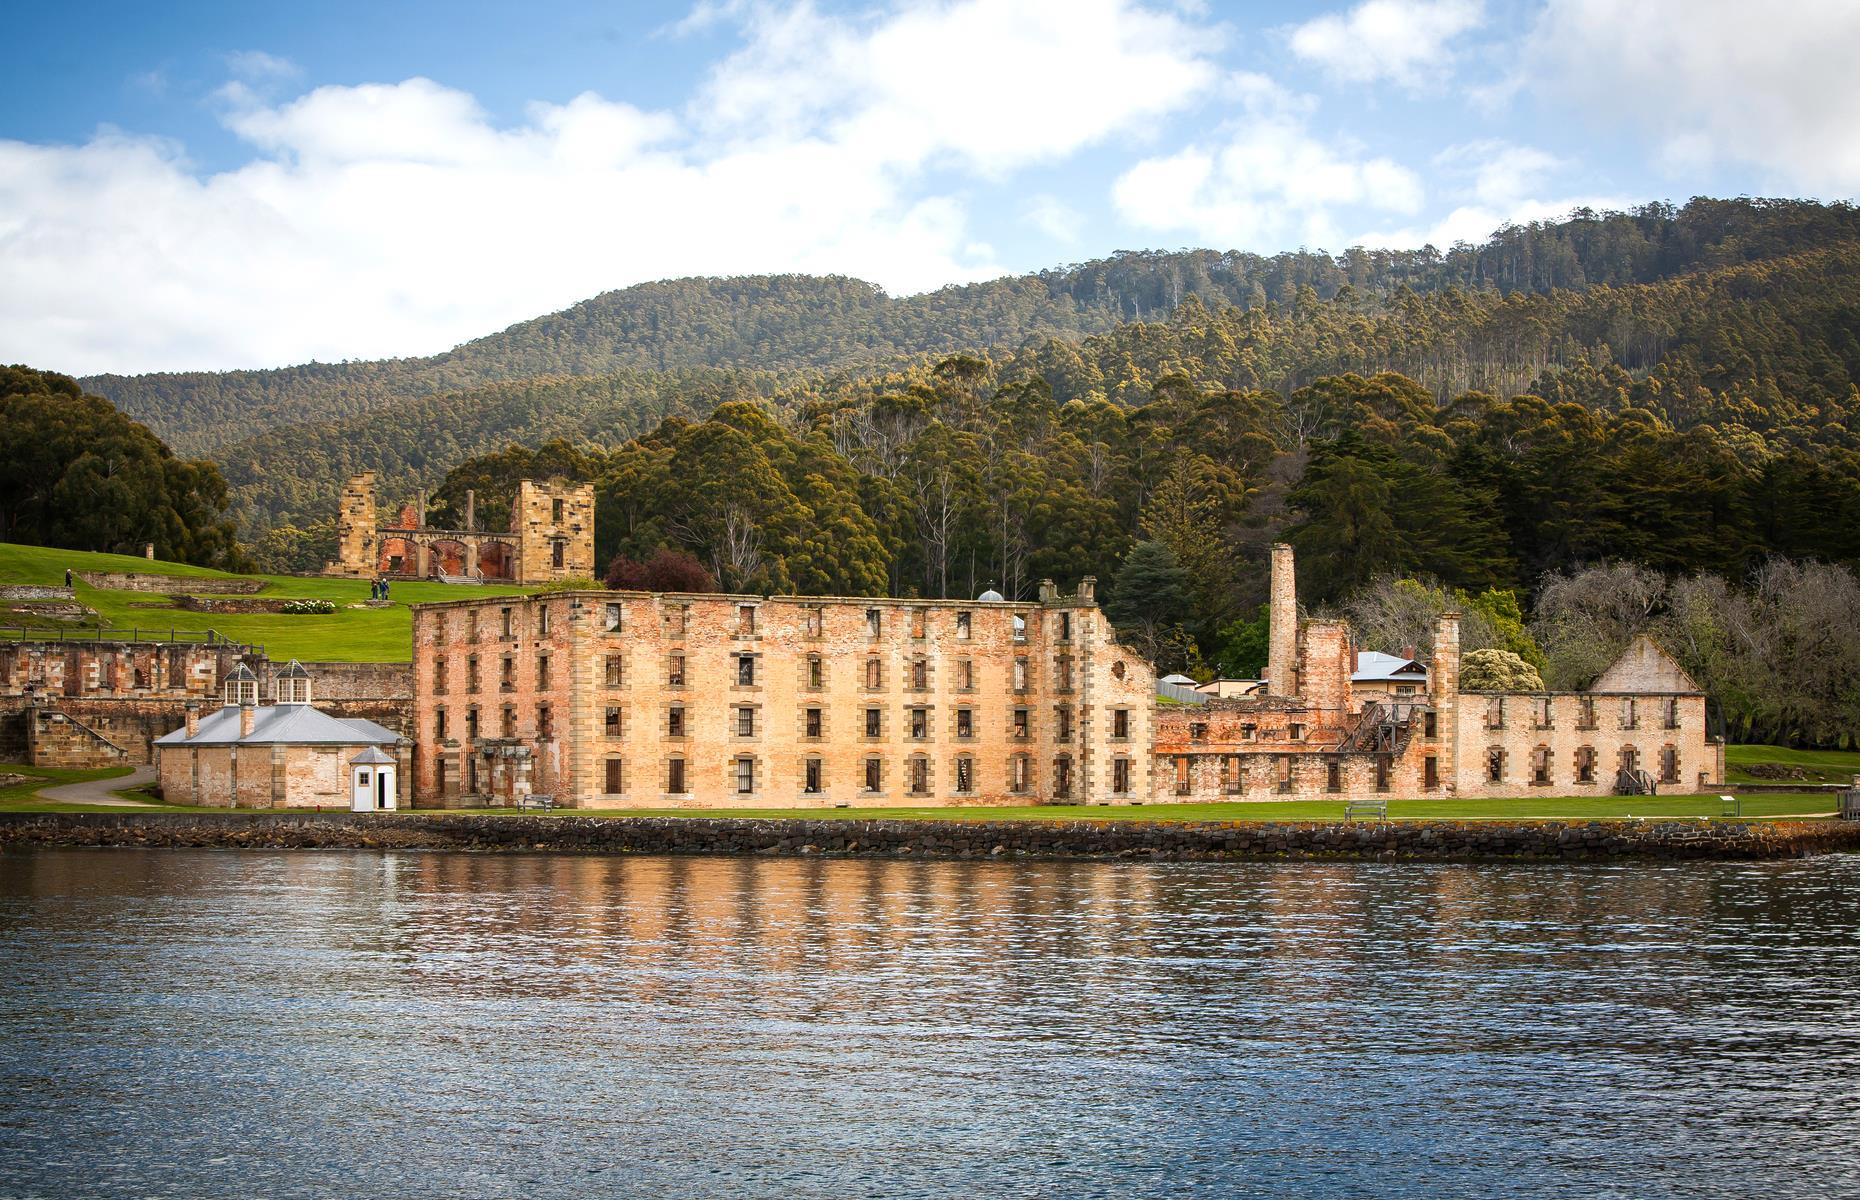 <p>A wretched place established on the wilds of the Tasman Peninsula, Port Arthur was one of the harshest and largest convict settlements in all of Australia. It closed in 1877 and was renamed Carnarvon for a time, with land auctioned in the 1880s and people taking up residence in and around the old site to form a new township. Fires in 1895 and 1897 destroyed many buildings and gutted its Penitentiary, Separate Prison and Hospital. Today the complex of ruins is a foreboding but fascinating place to explore.</p>